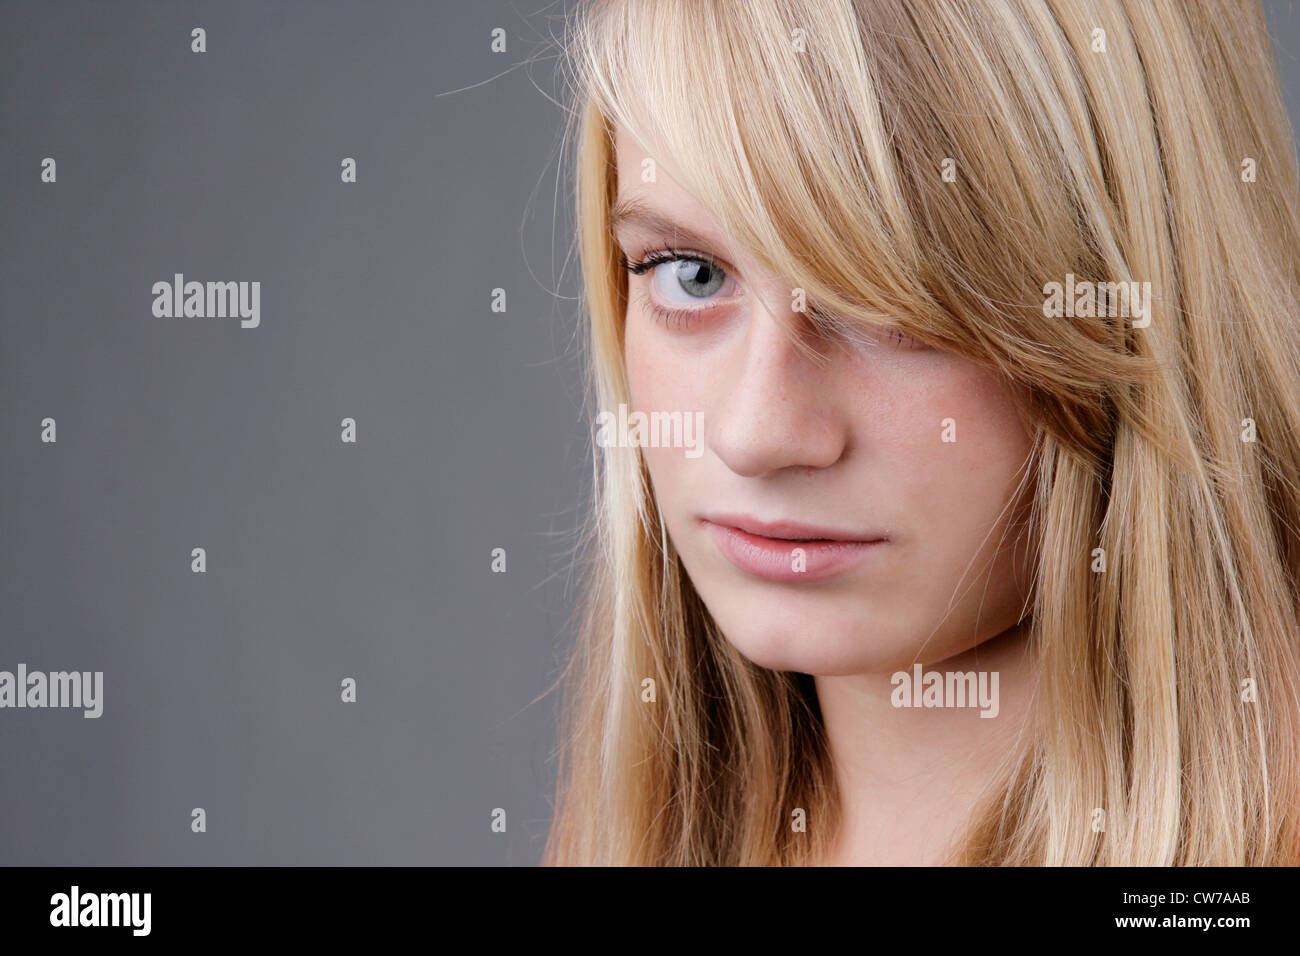 portrait of a young blond woman, Germany Stock Photo